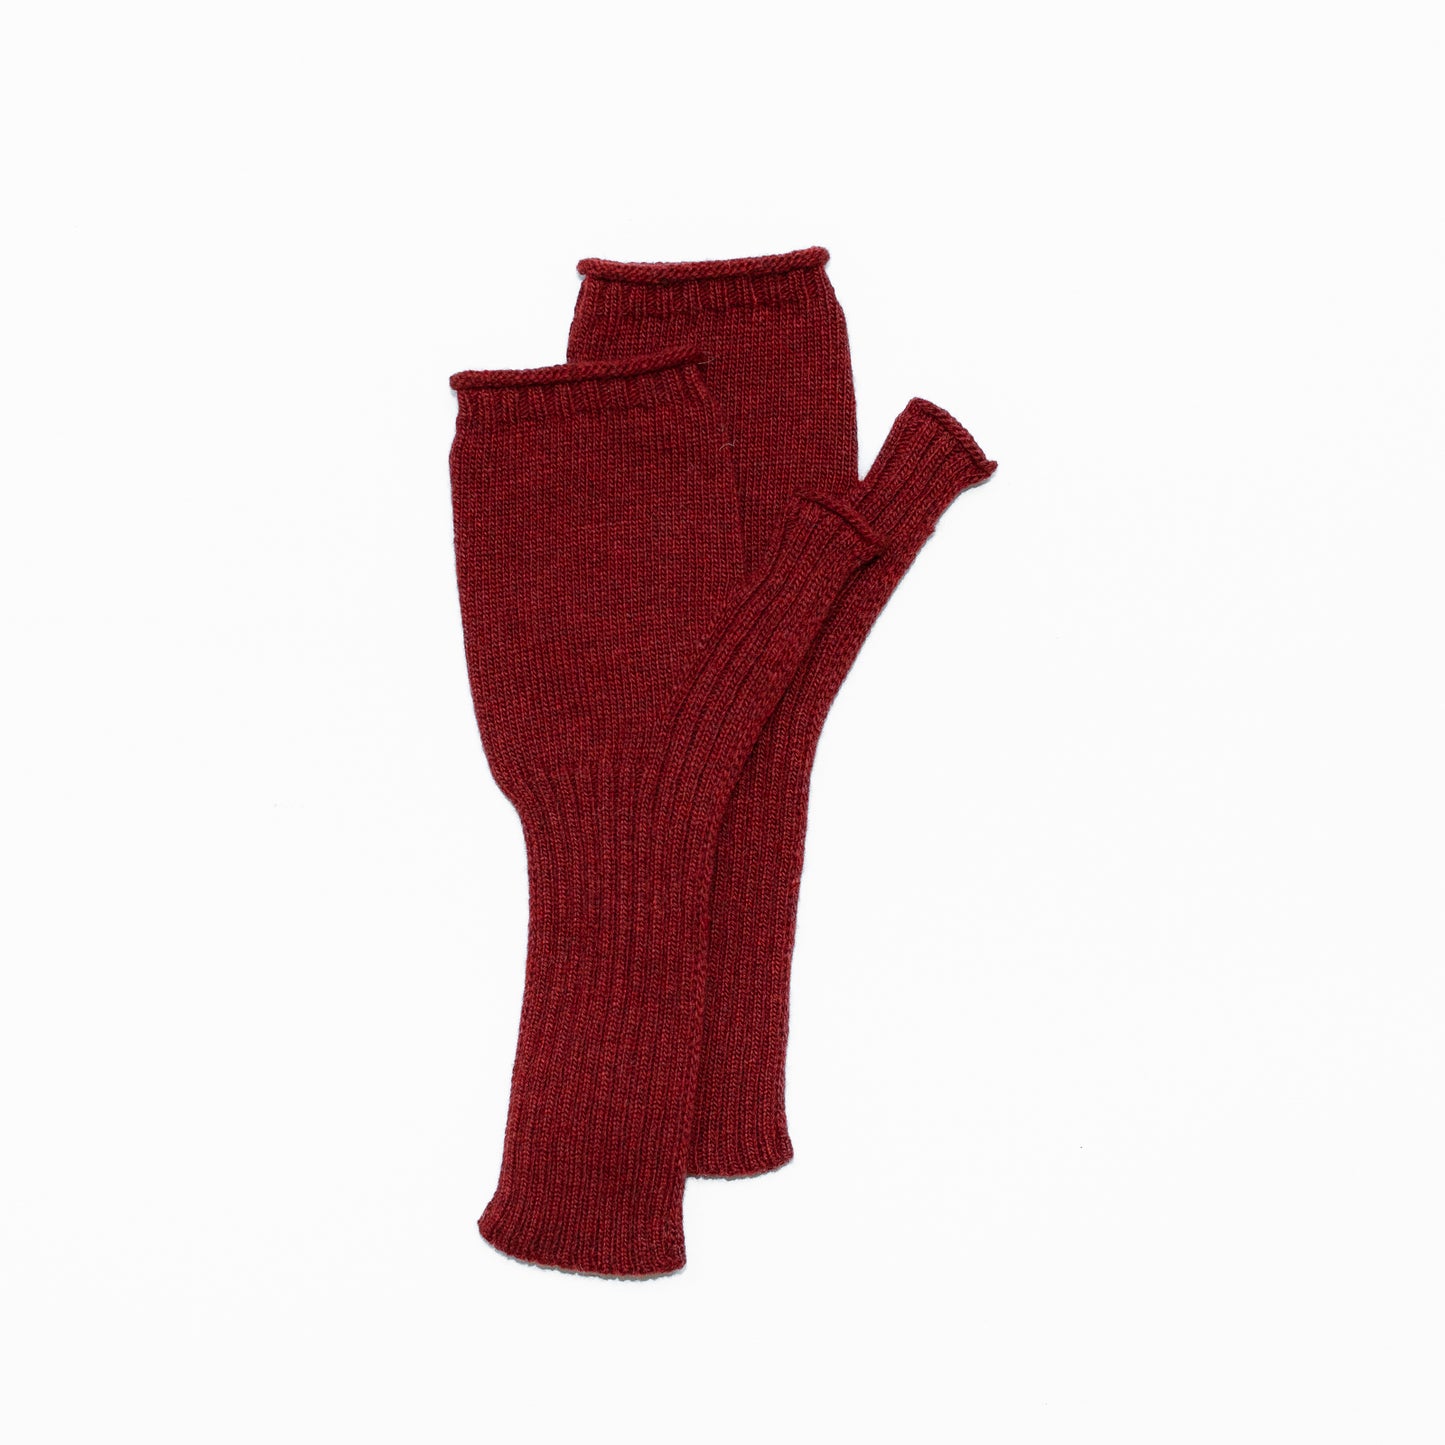 The Nora Lambswool Mittens in Russet Red